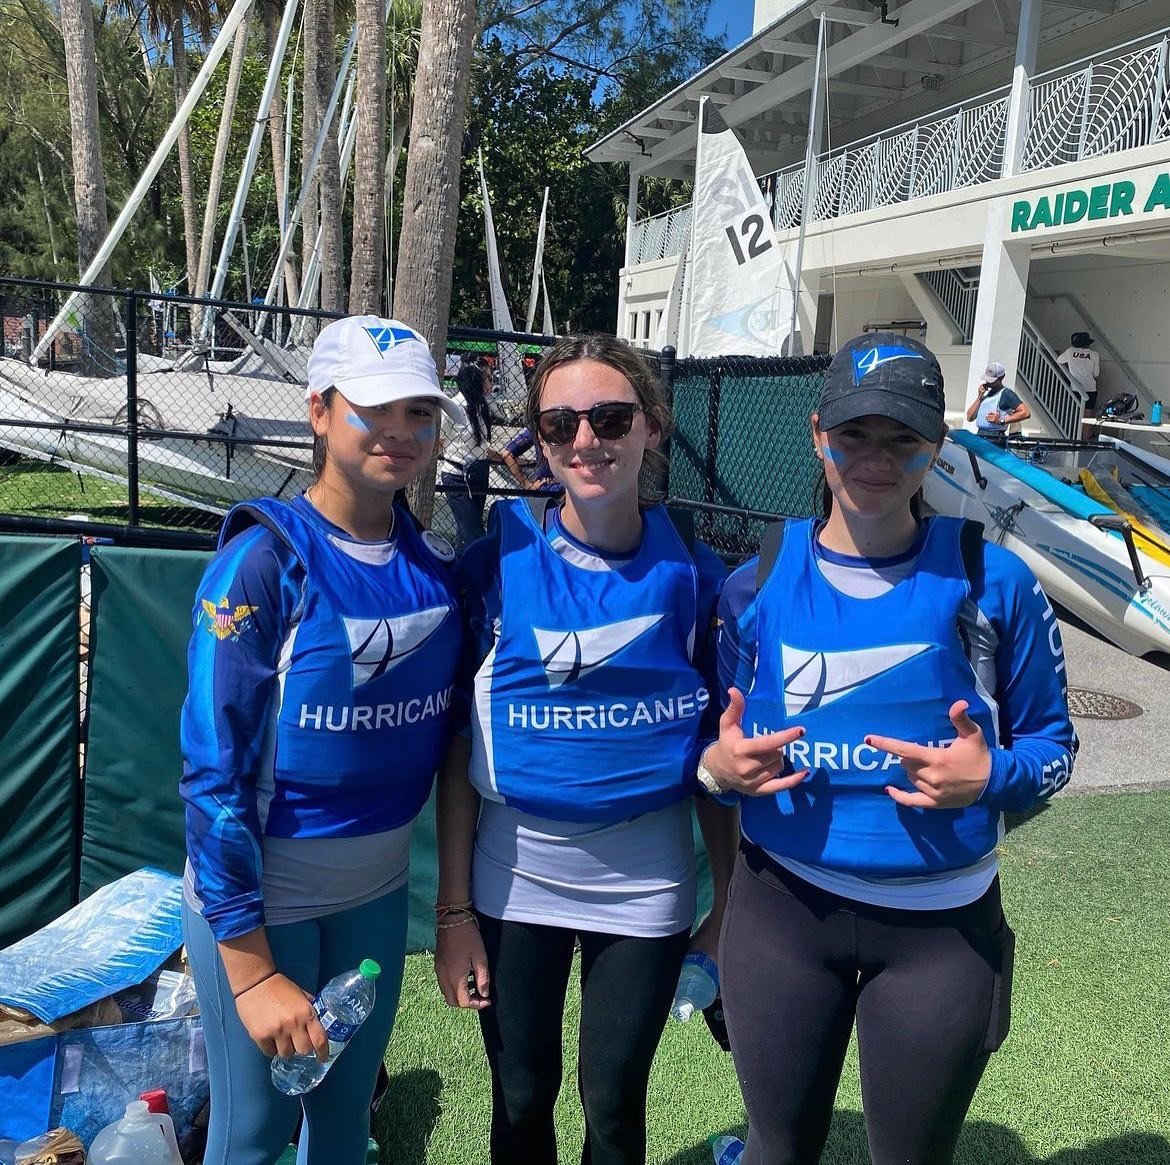 The Antilles team is at Baker's Qualifier this weekend competing for a place in Nationals. Come out and show your support. 📷: @stthomasyachtclub